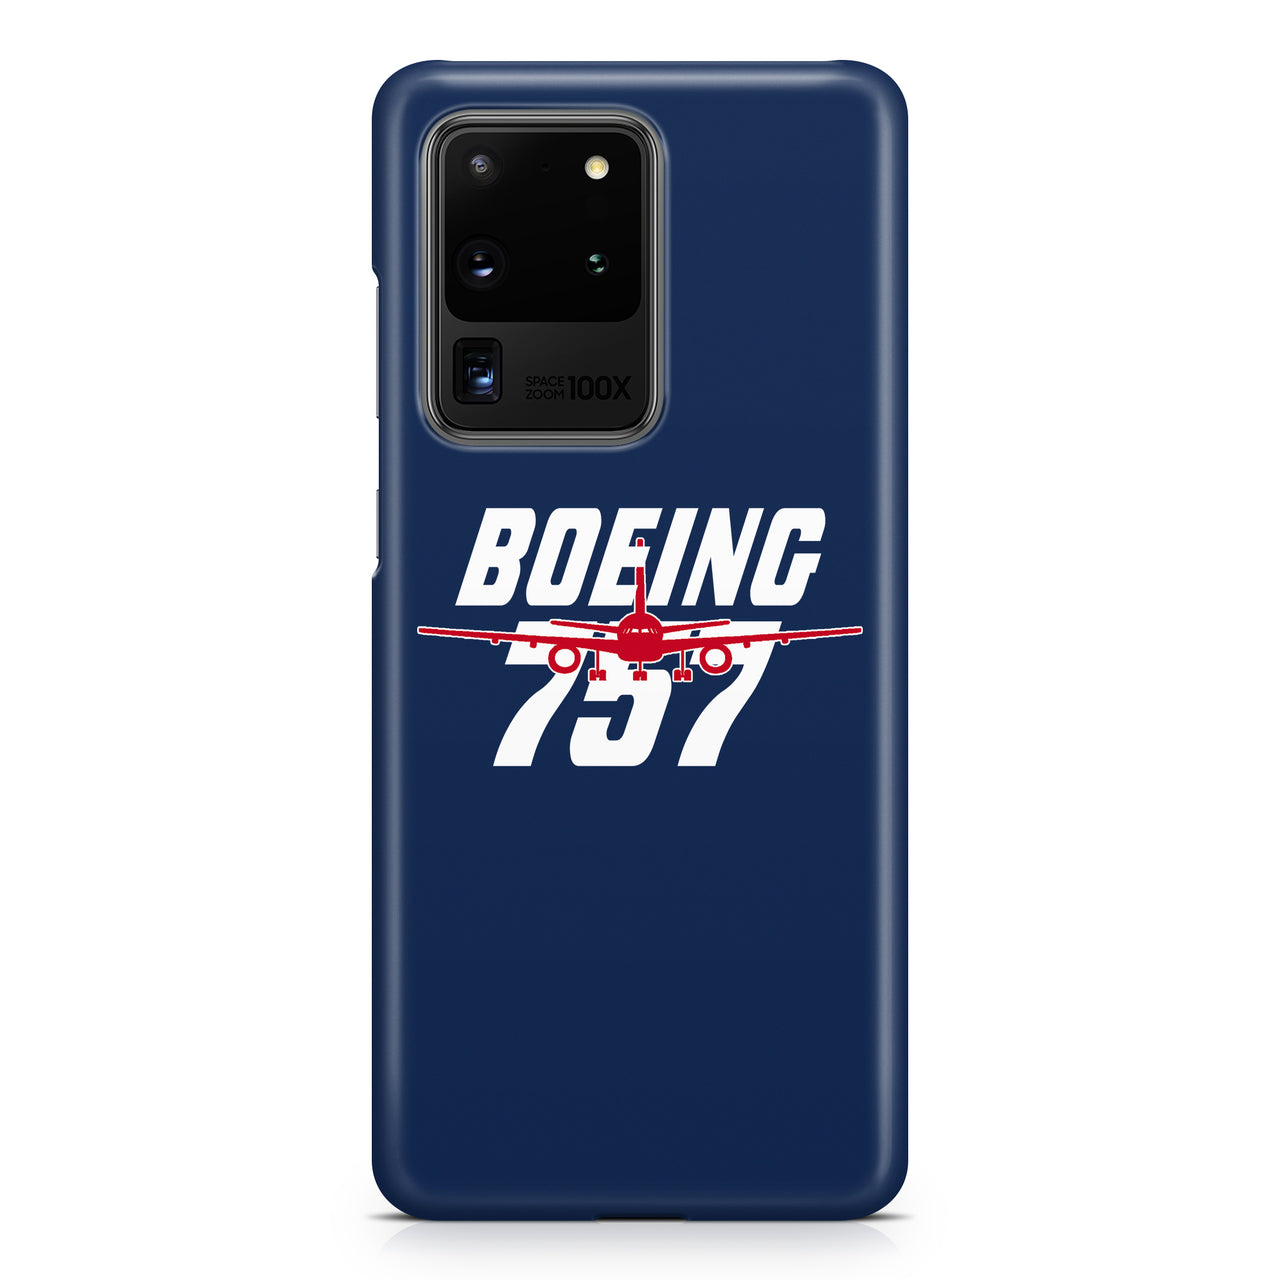 Amazing Boeing 757 Samsung A Cases